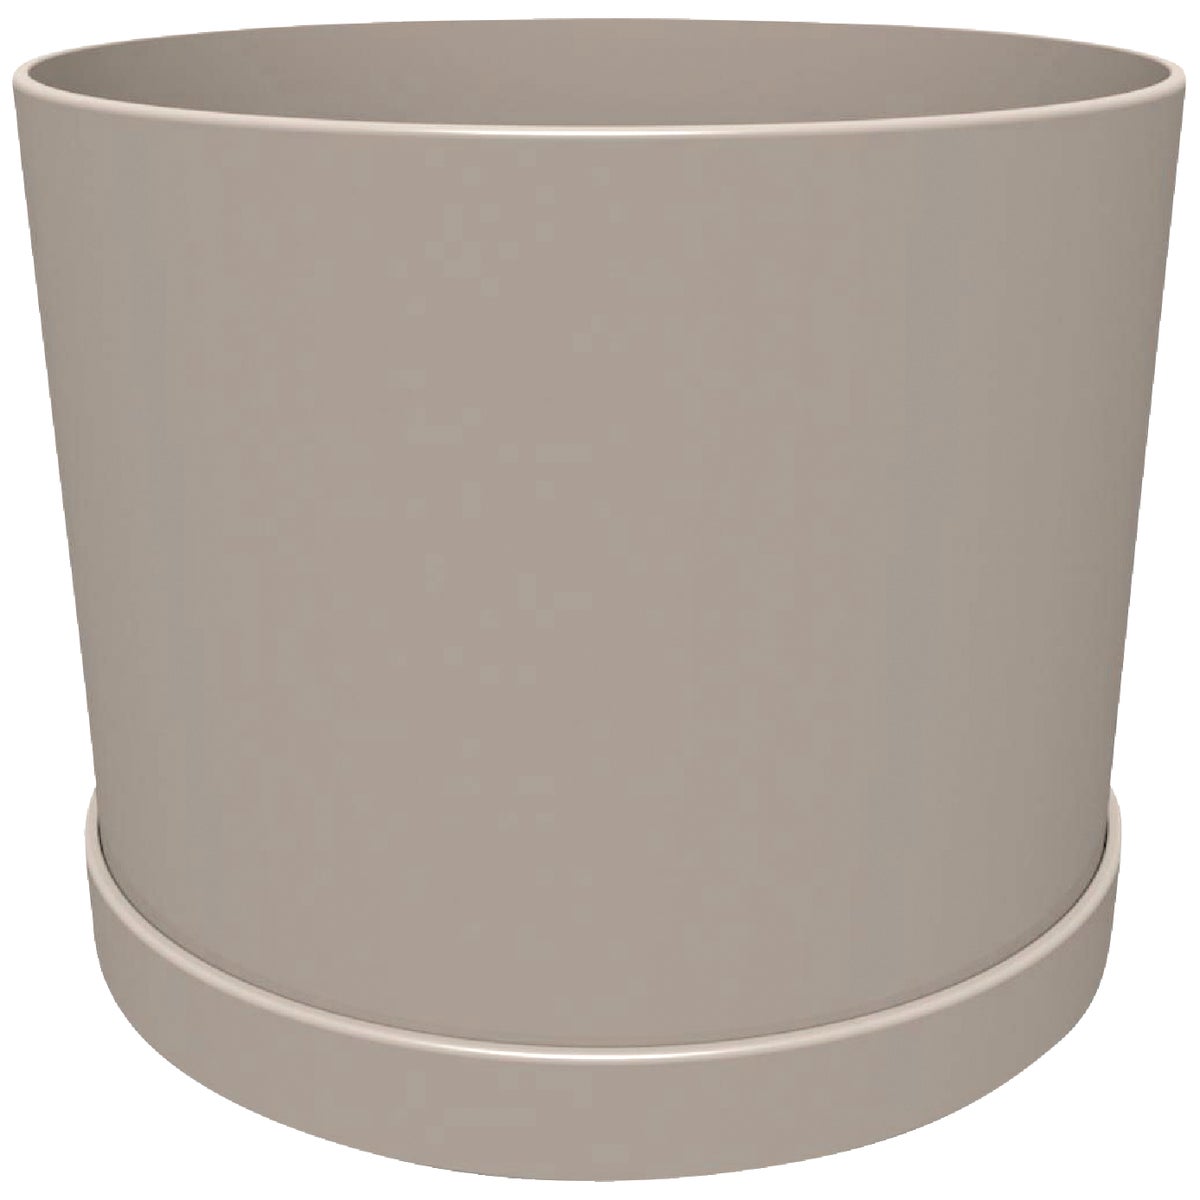 Bloem Mathers Collection 6 In. Pebble Stone Plastic Planter